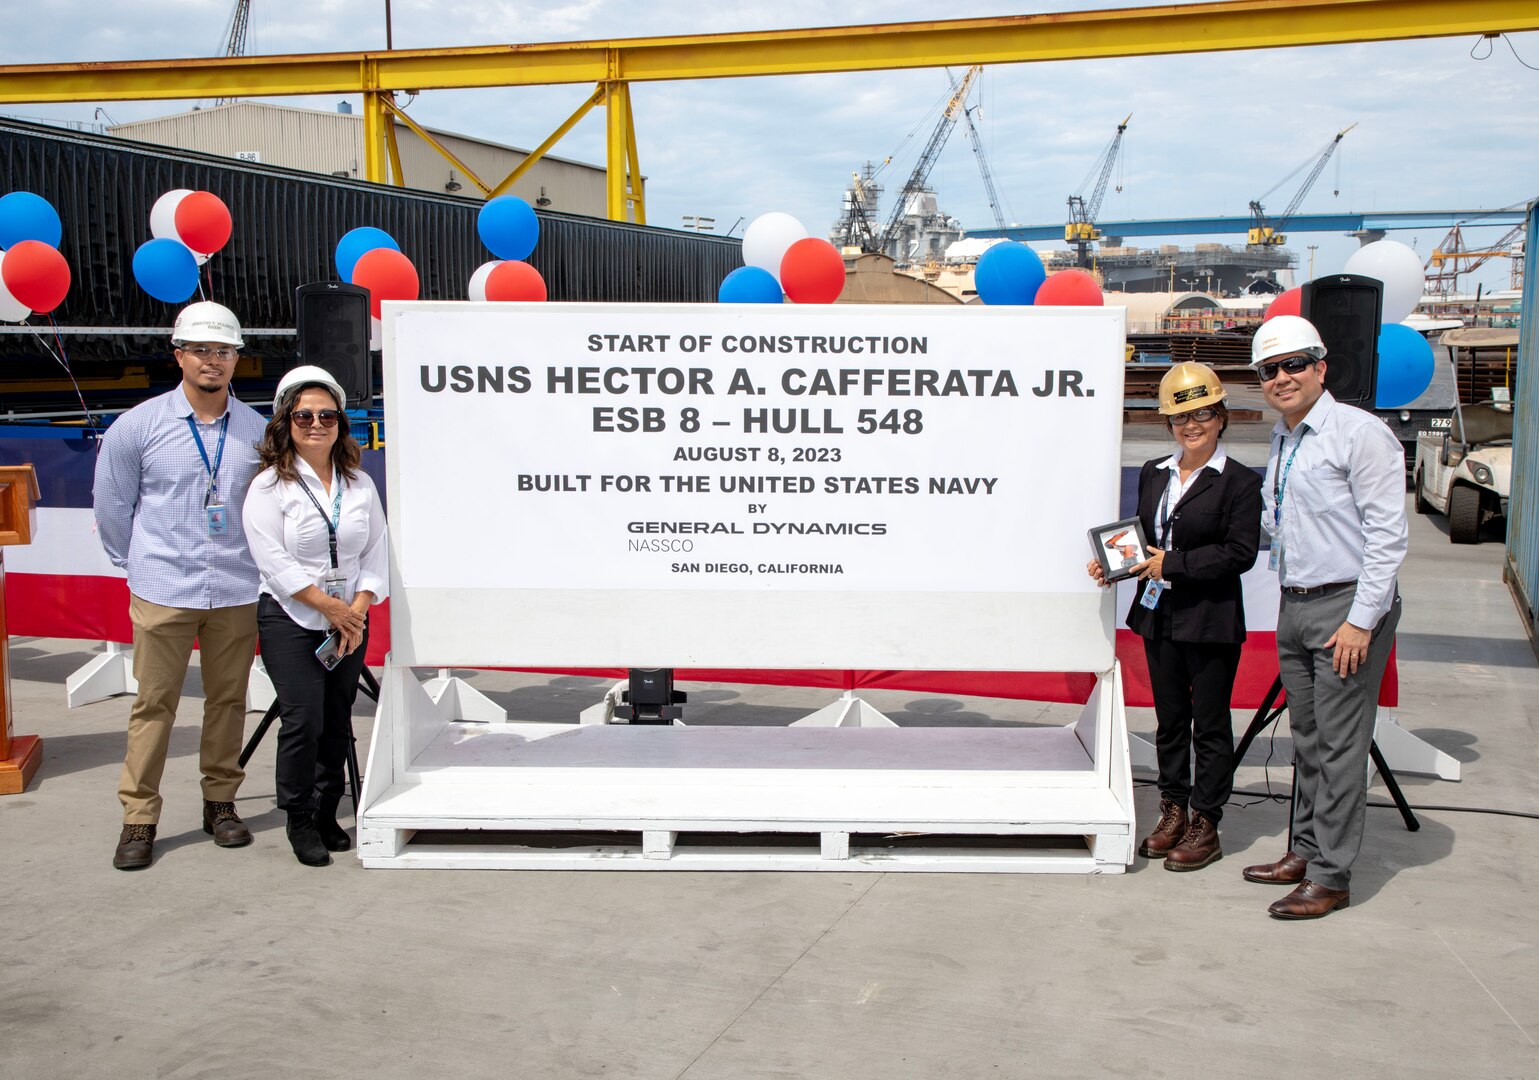 Chariza “Chacha” Solis, a long-time NASSCO employee and the Start of Construction honoree for the future USNS Hector A. Cafferata, initiated the first cut of steel that will be used to construct the vessel.